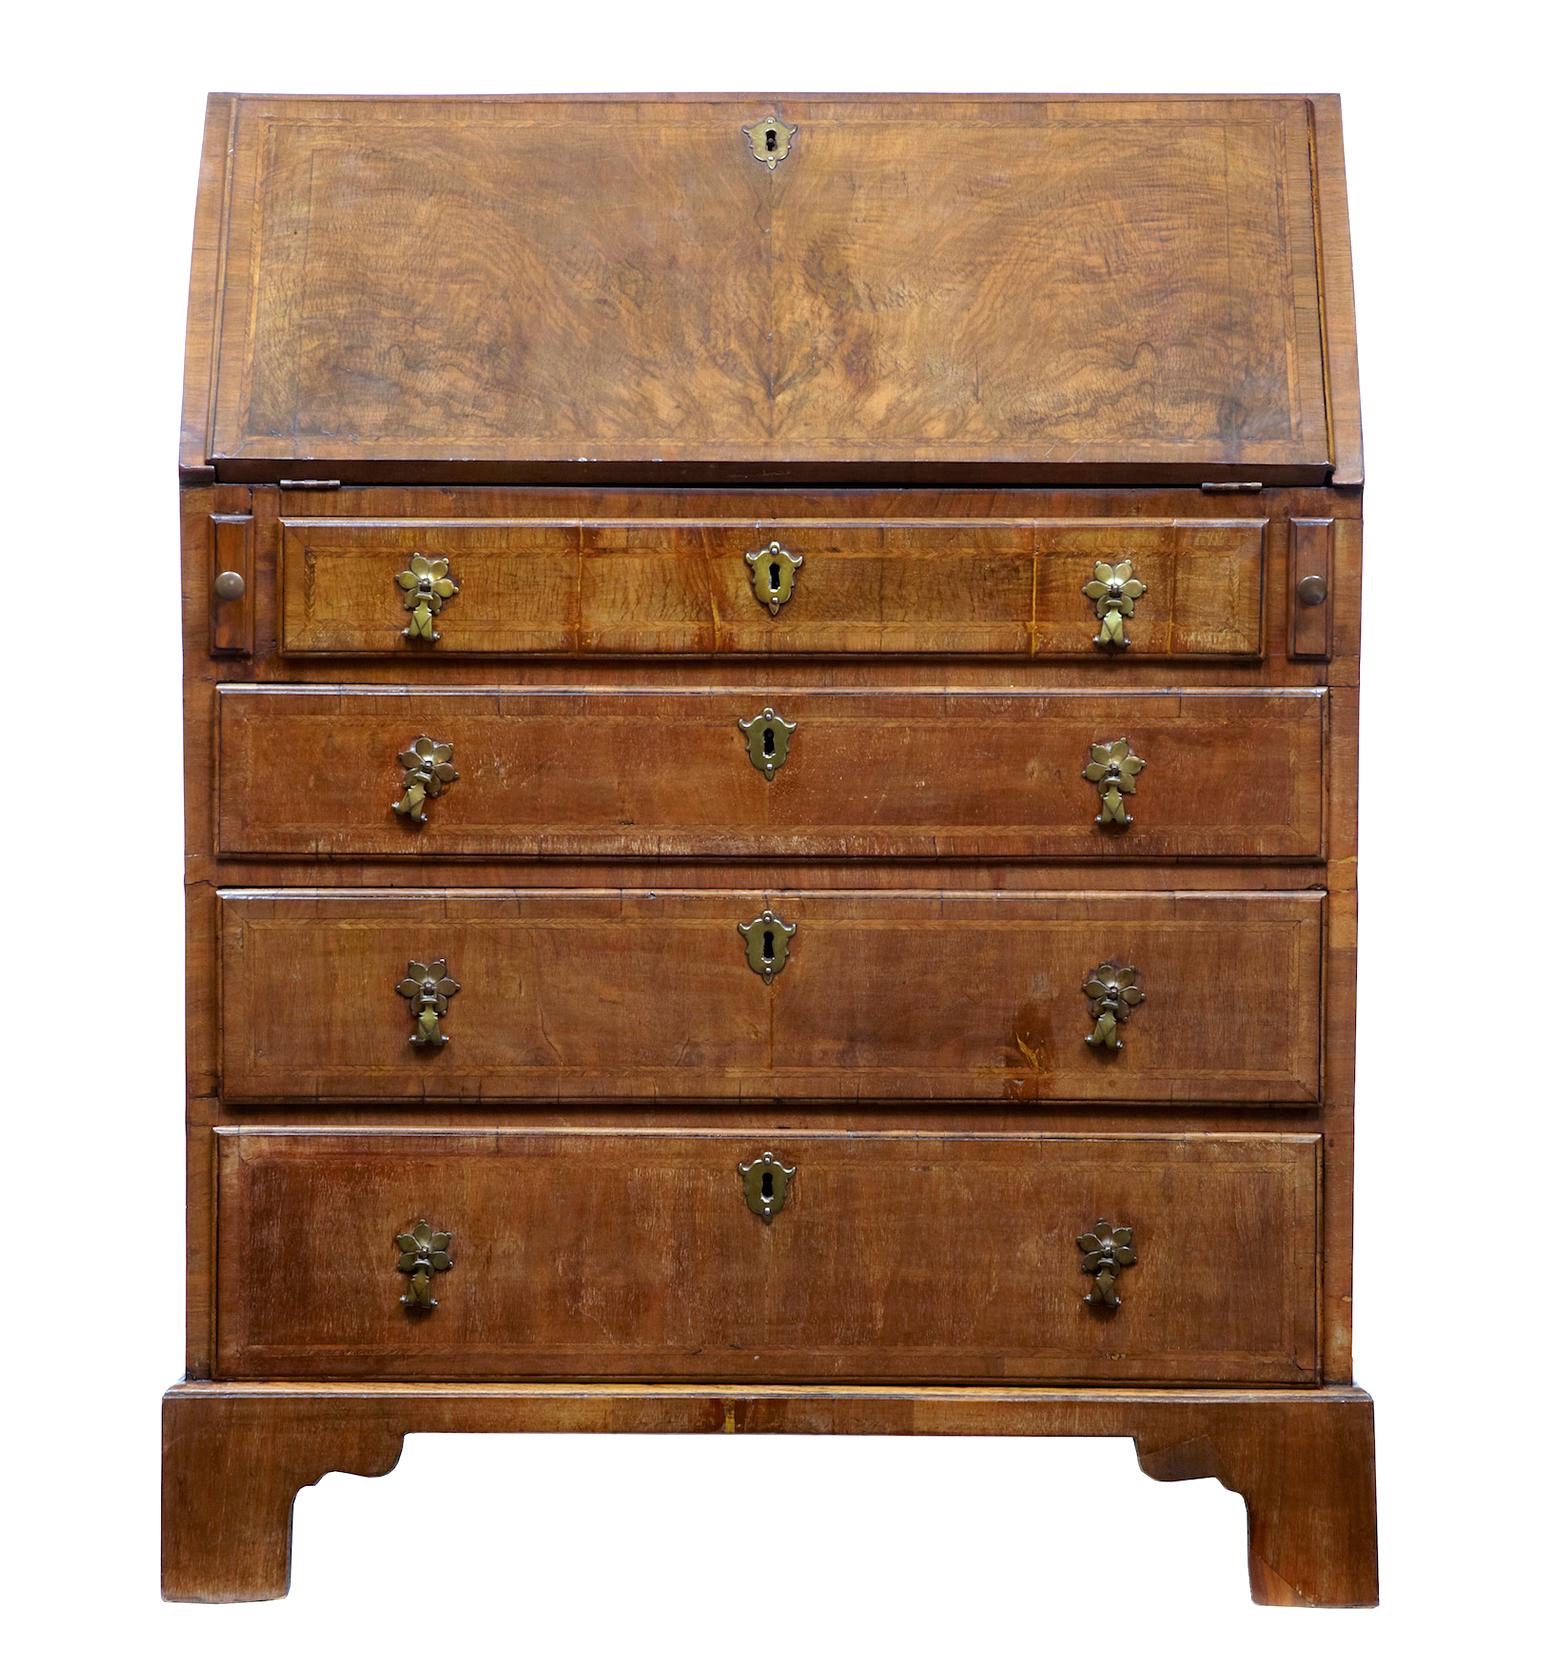 Queen Anne 18th Century Walnut Bureau of Small Proportions